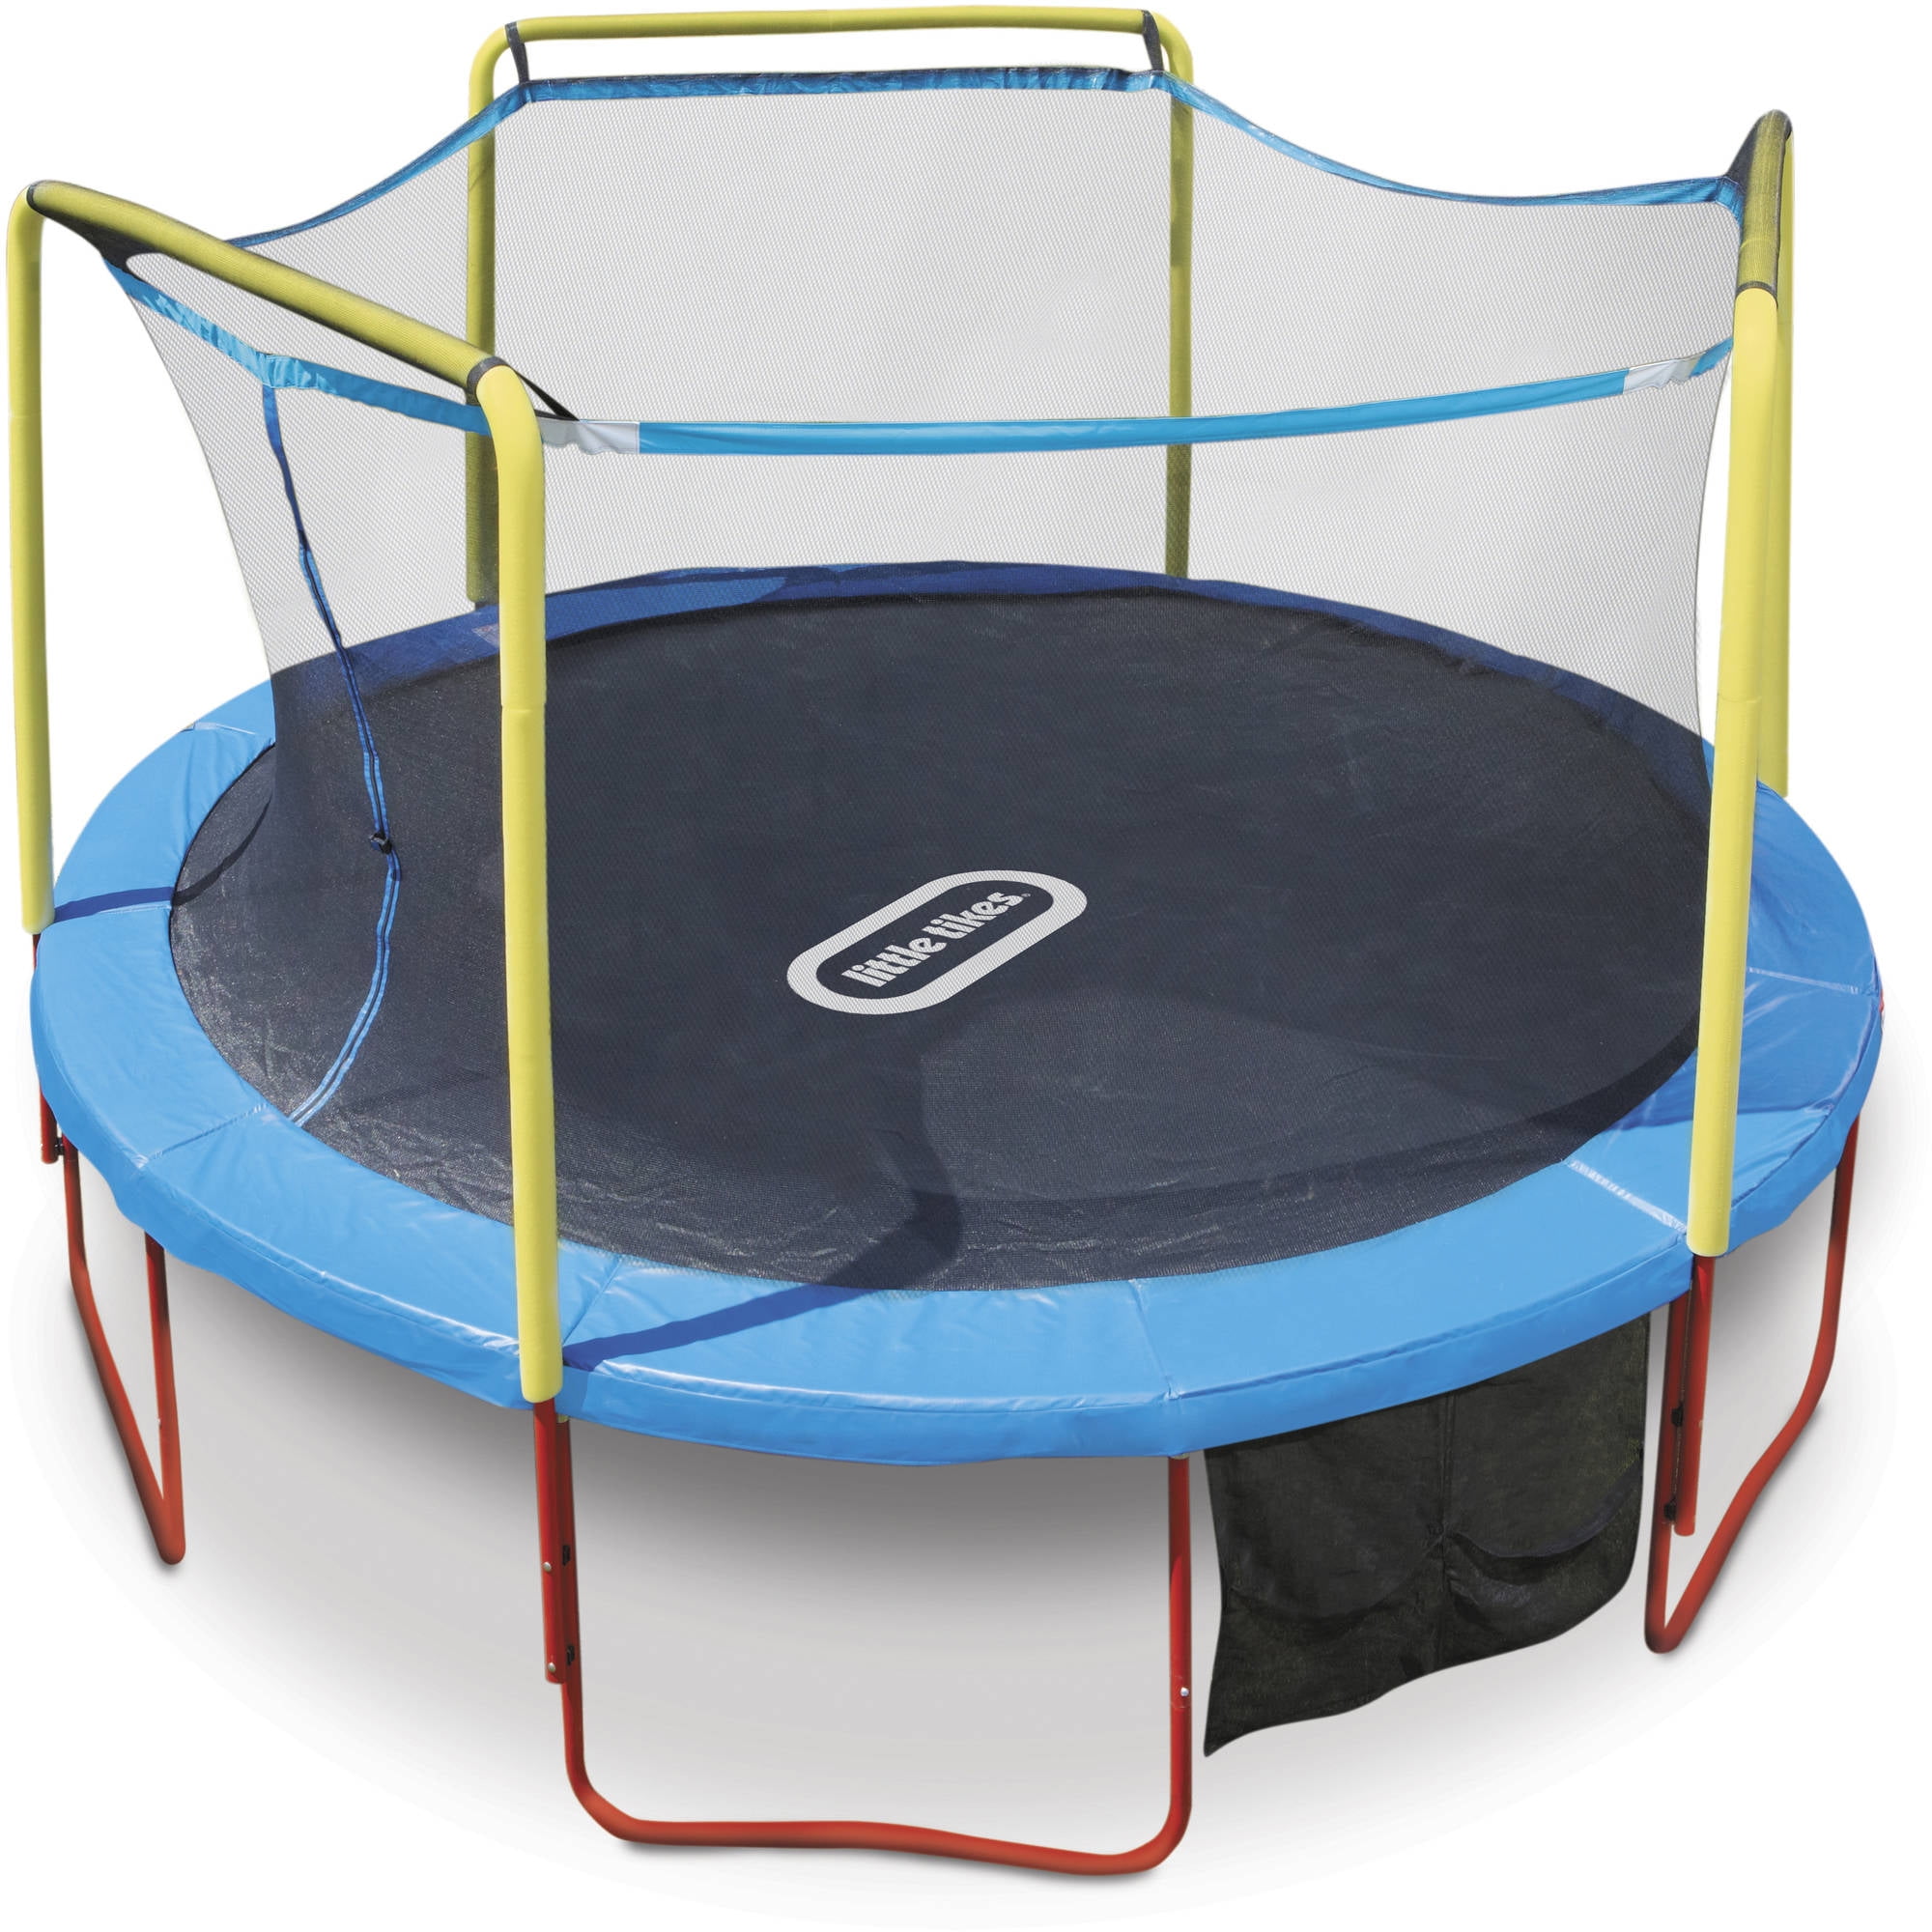 Trampoline, with Enclosure, Blue/Yellow 